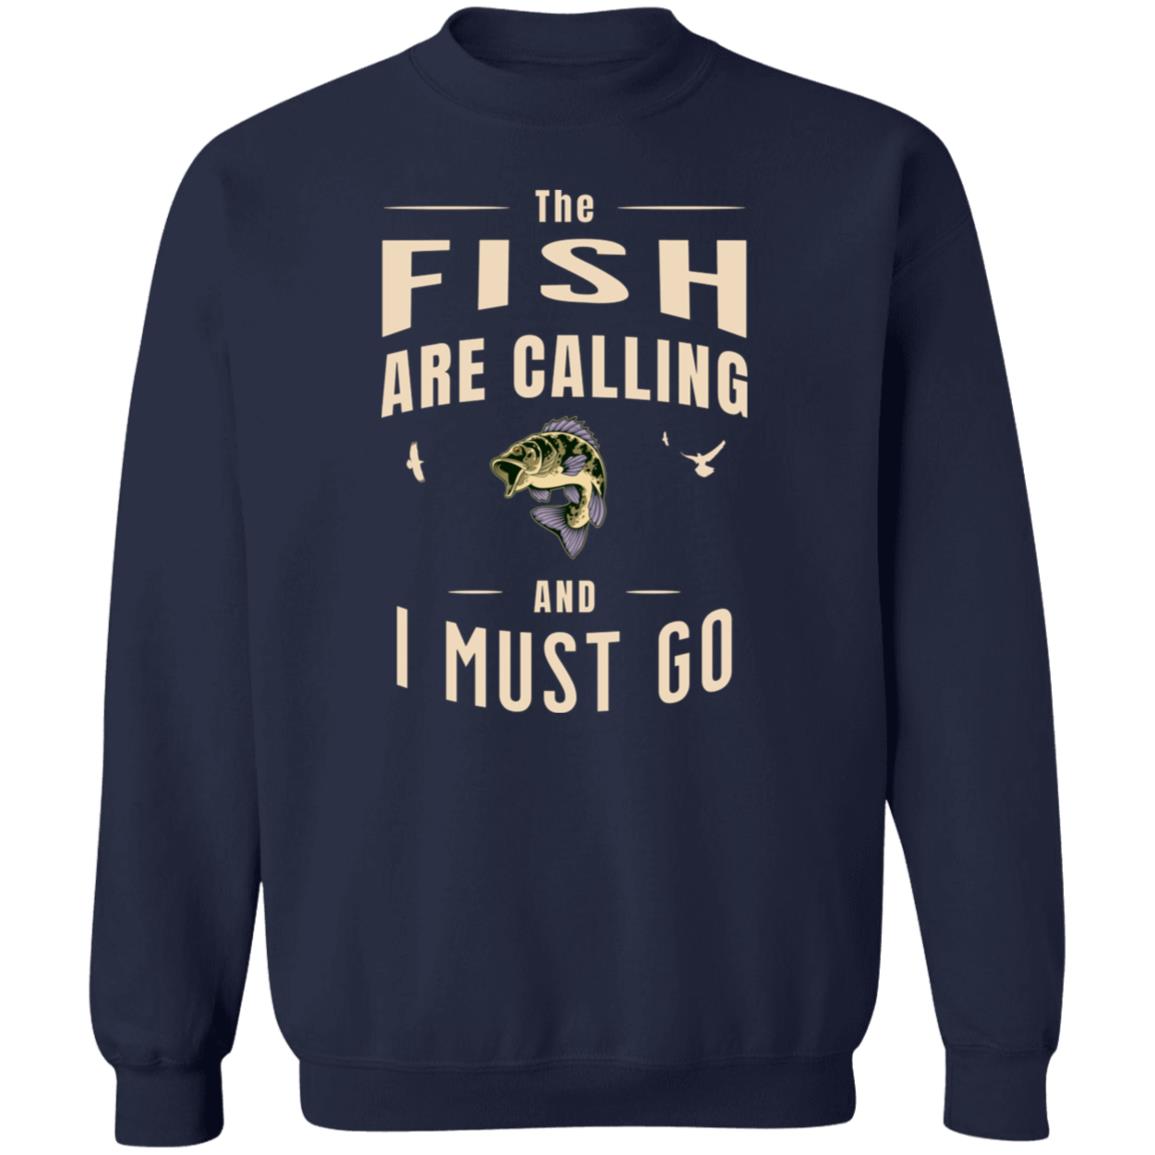 The fish are calling and I must go k sweatshirt navy